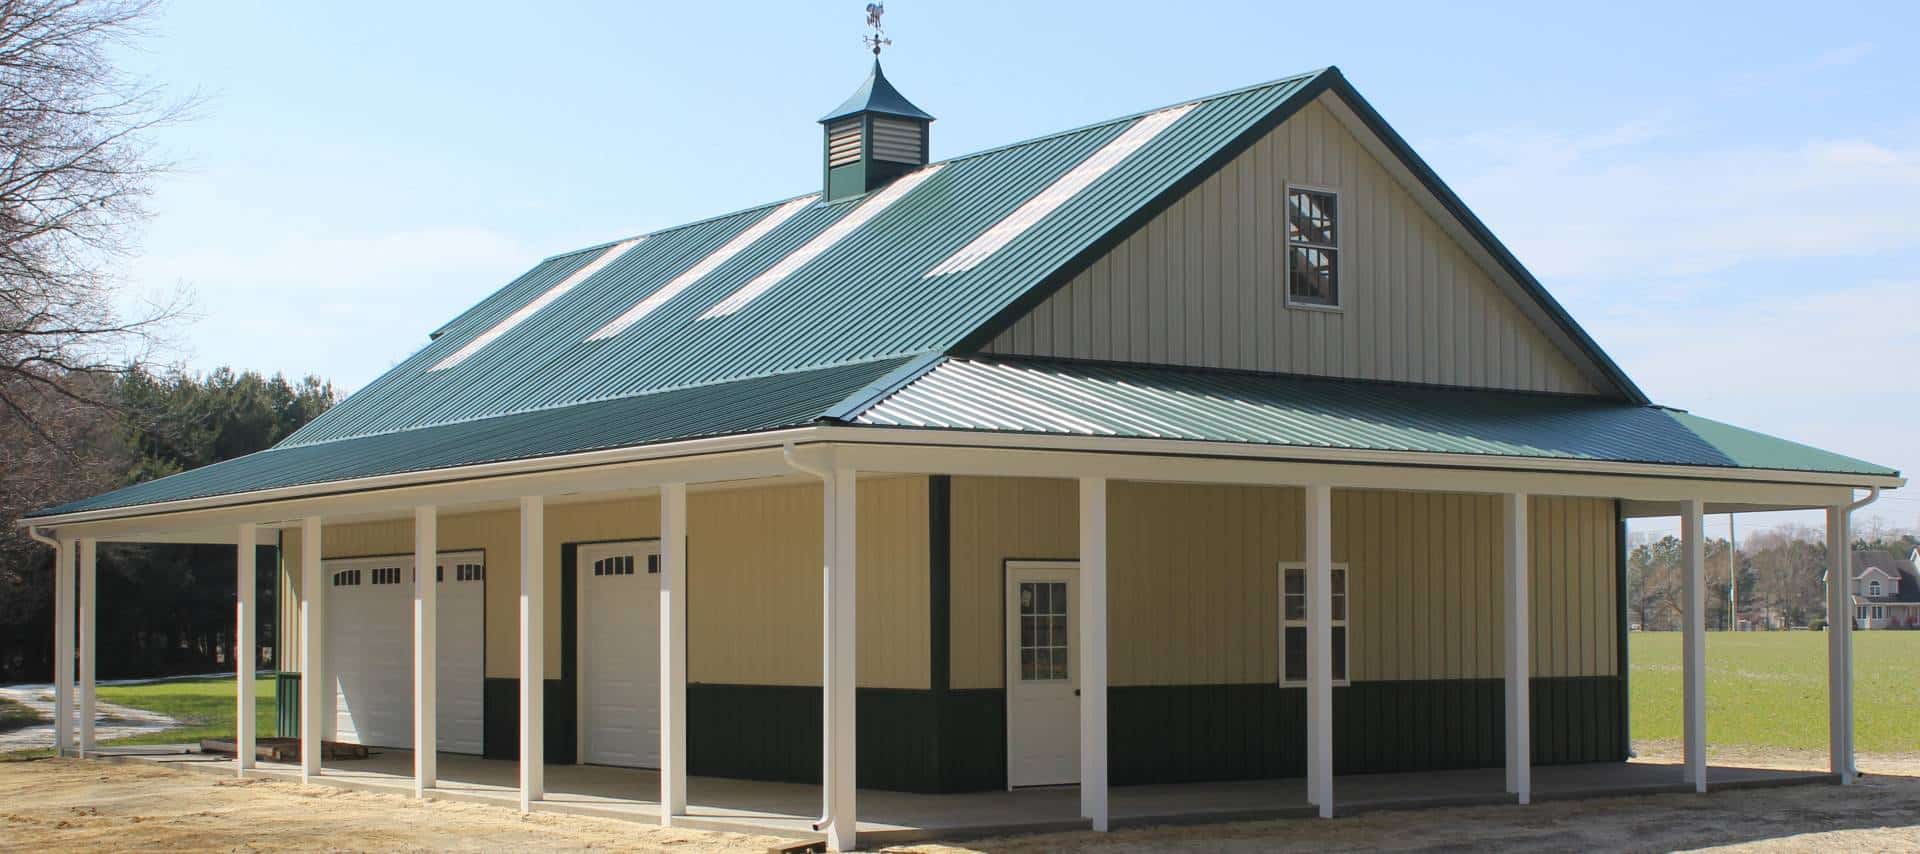 Enclosed Pole Barn Design - This Is A 40 X 60 X 16 Partially Enclosed P...